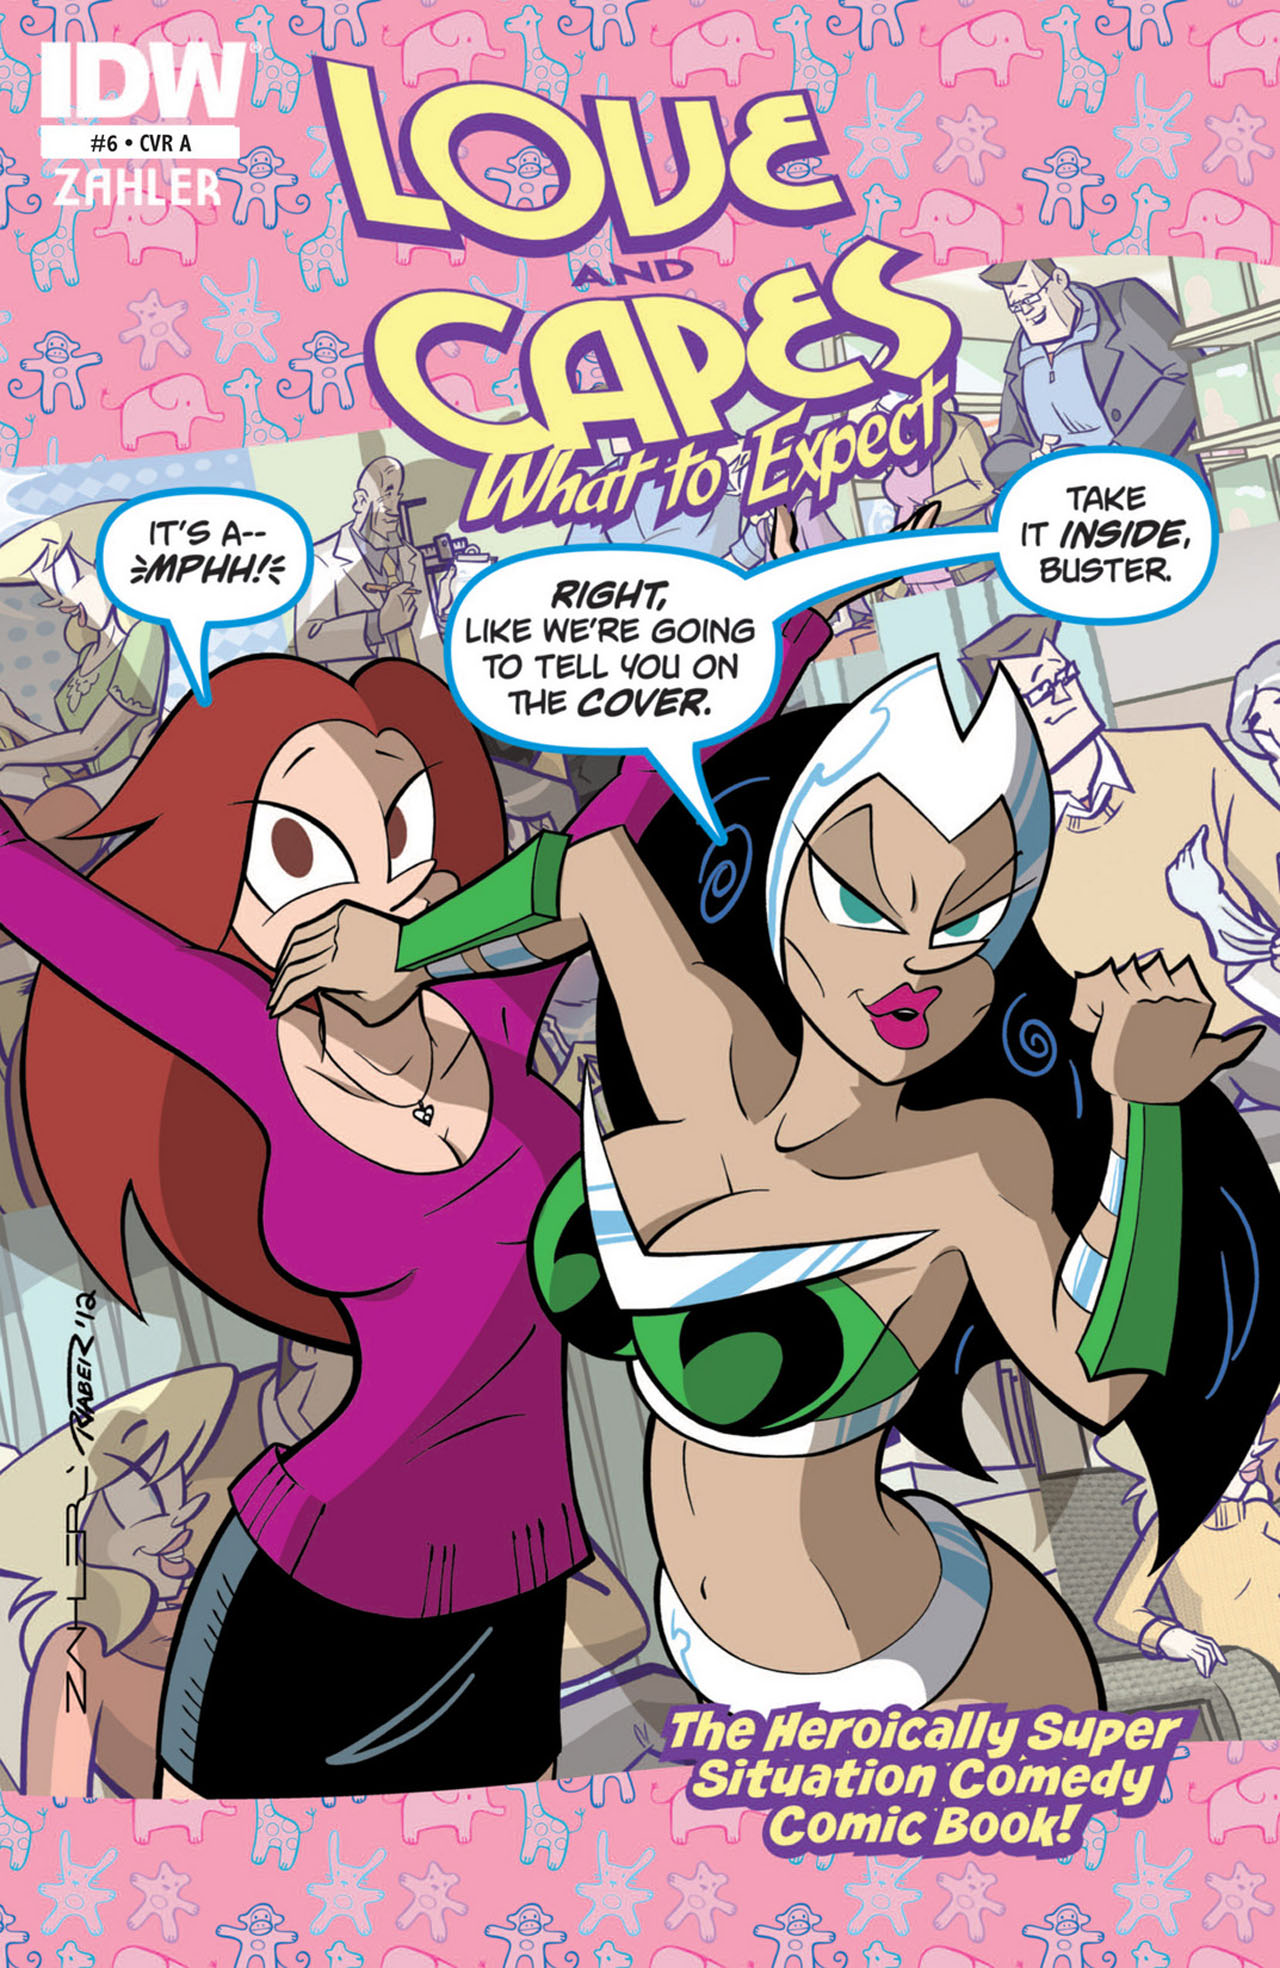 Read online Love and Capes: What to Expect comic -  Issue #6 - 1